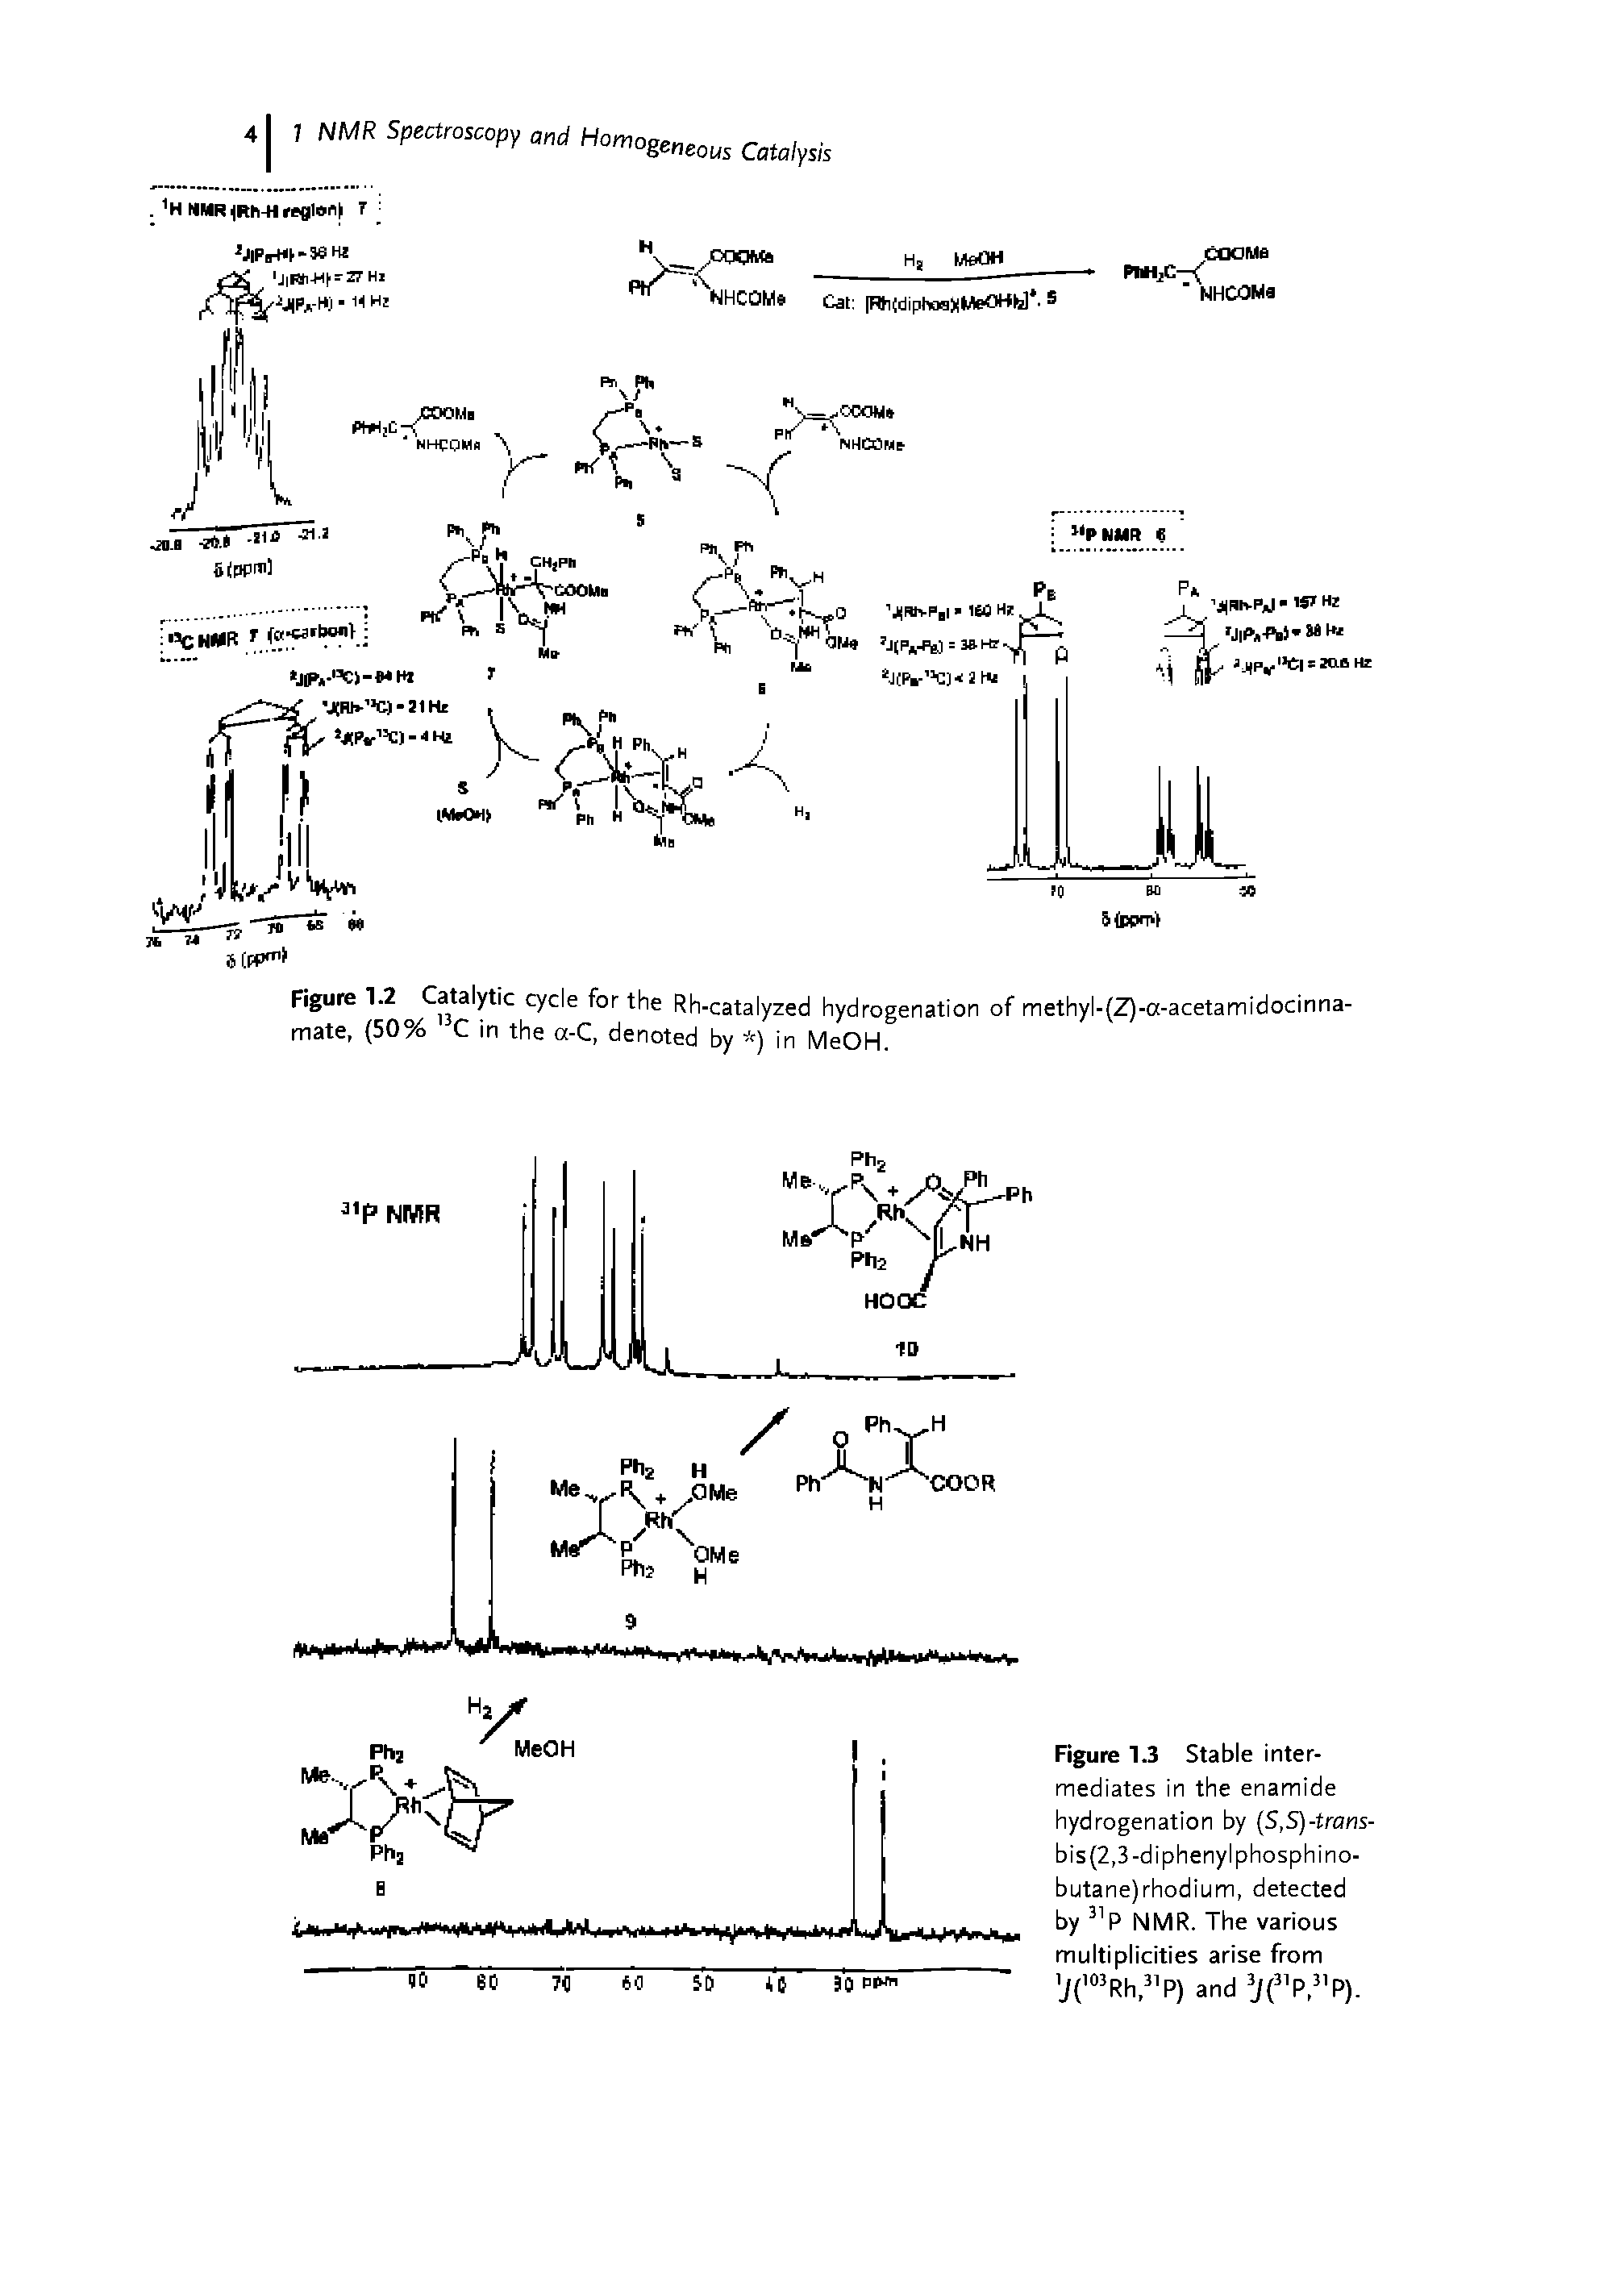 Figure 1.3 Stable intermediates in the enamide hydrogenation by (S,S)-trans-bis(2,3-diphenylphosphino-butane)rhodium, detected by P NMR. The various multiplicities arise from j Rh, P) and J( P, P).